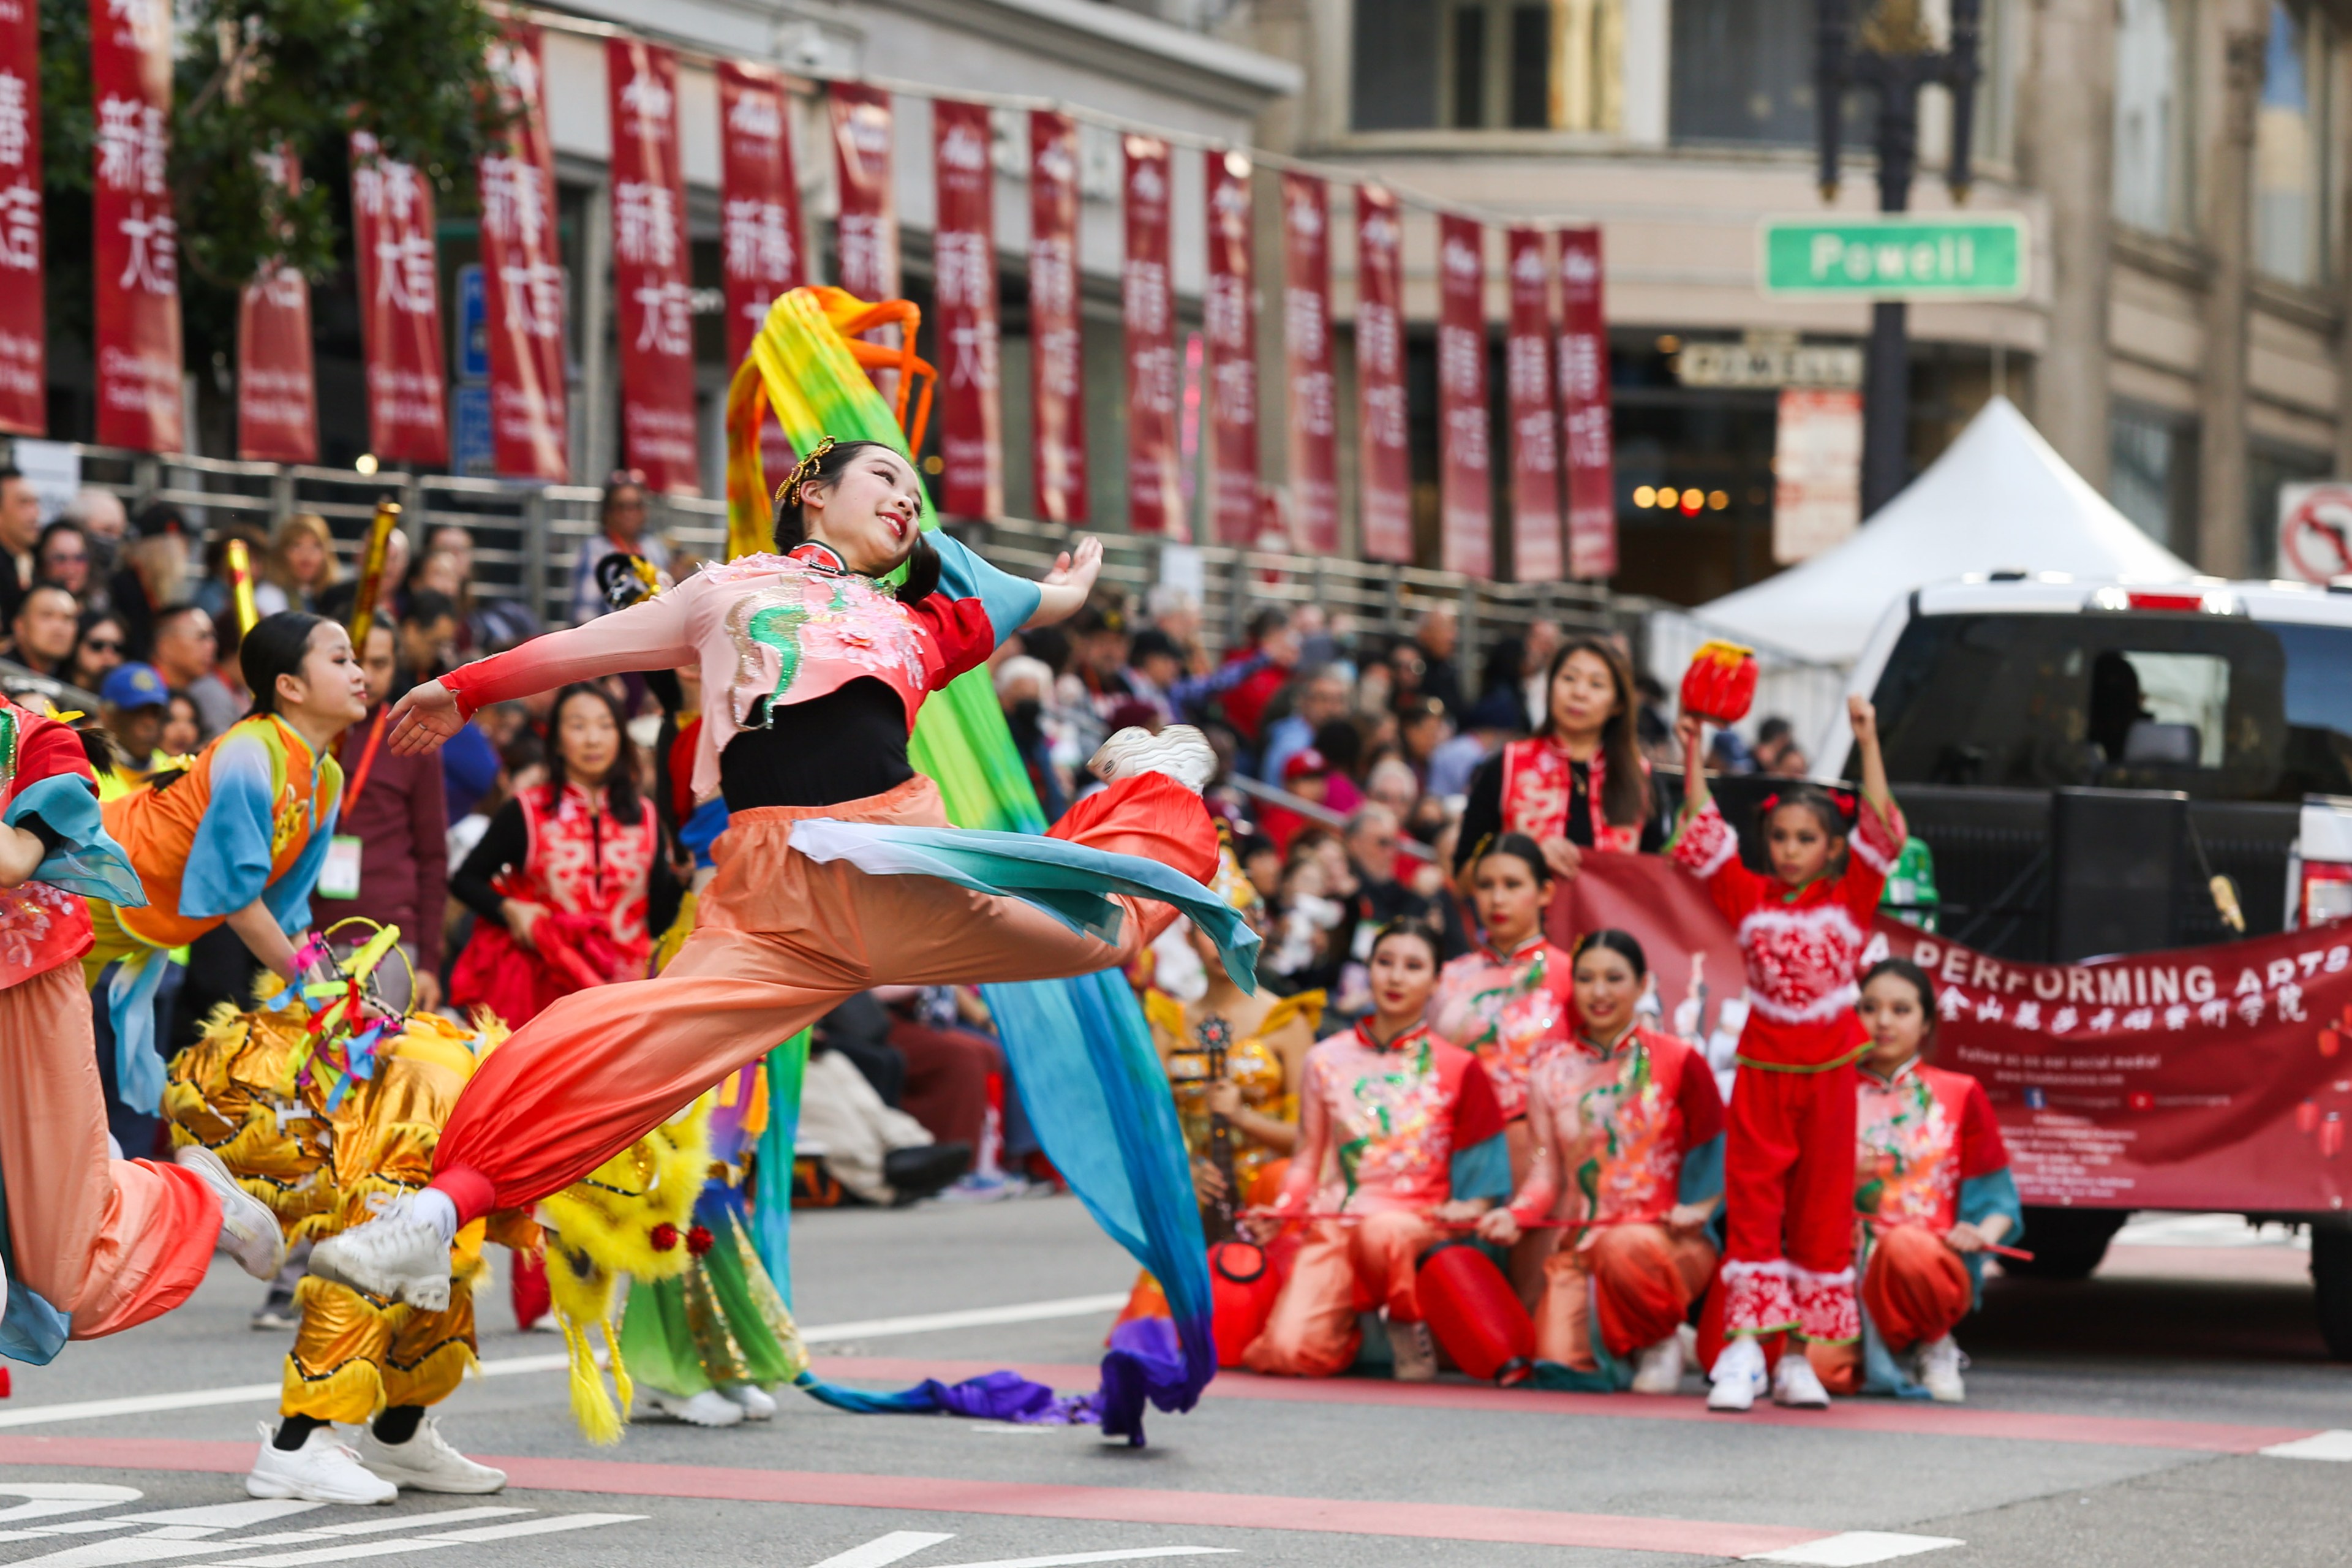 A dancer in colorful attire performs at a street parade with onlookers and participants in traditional Asian costumes.